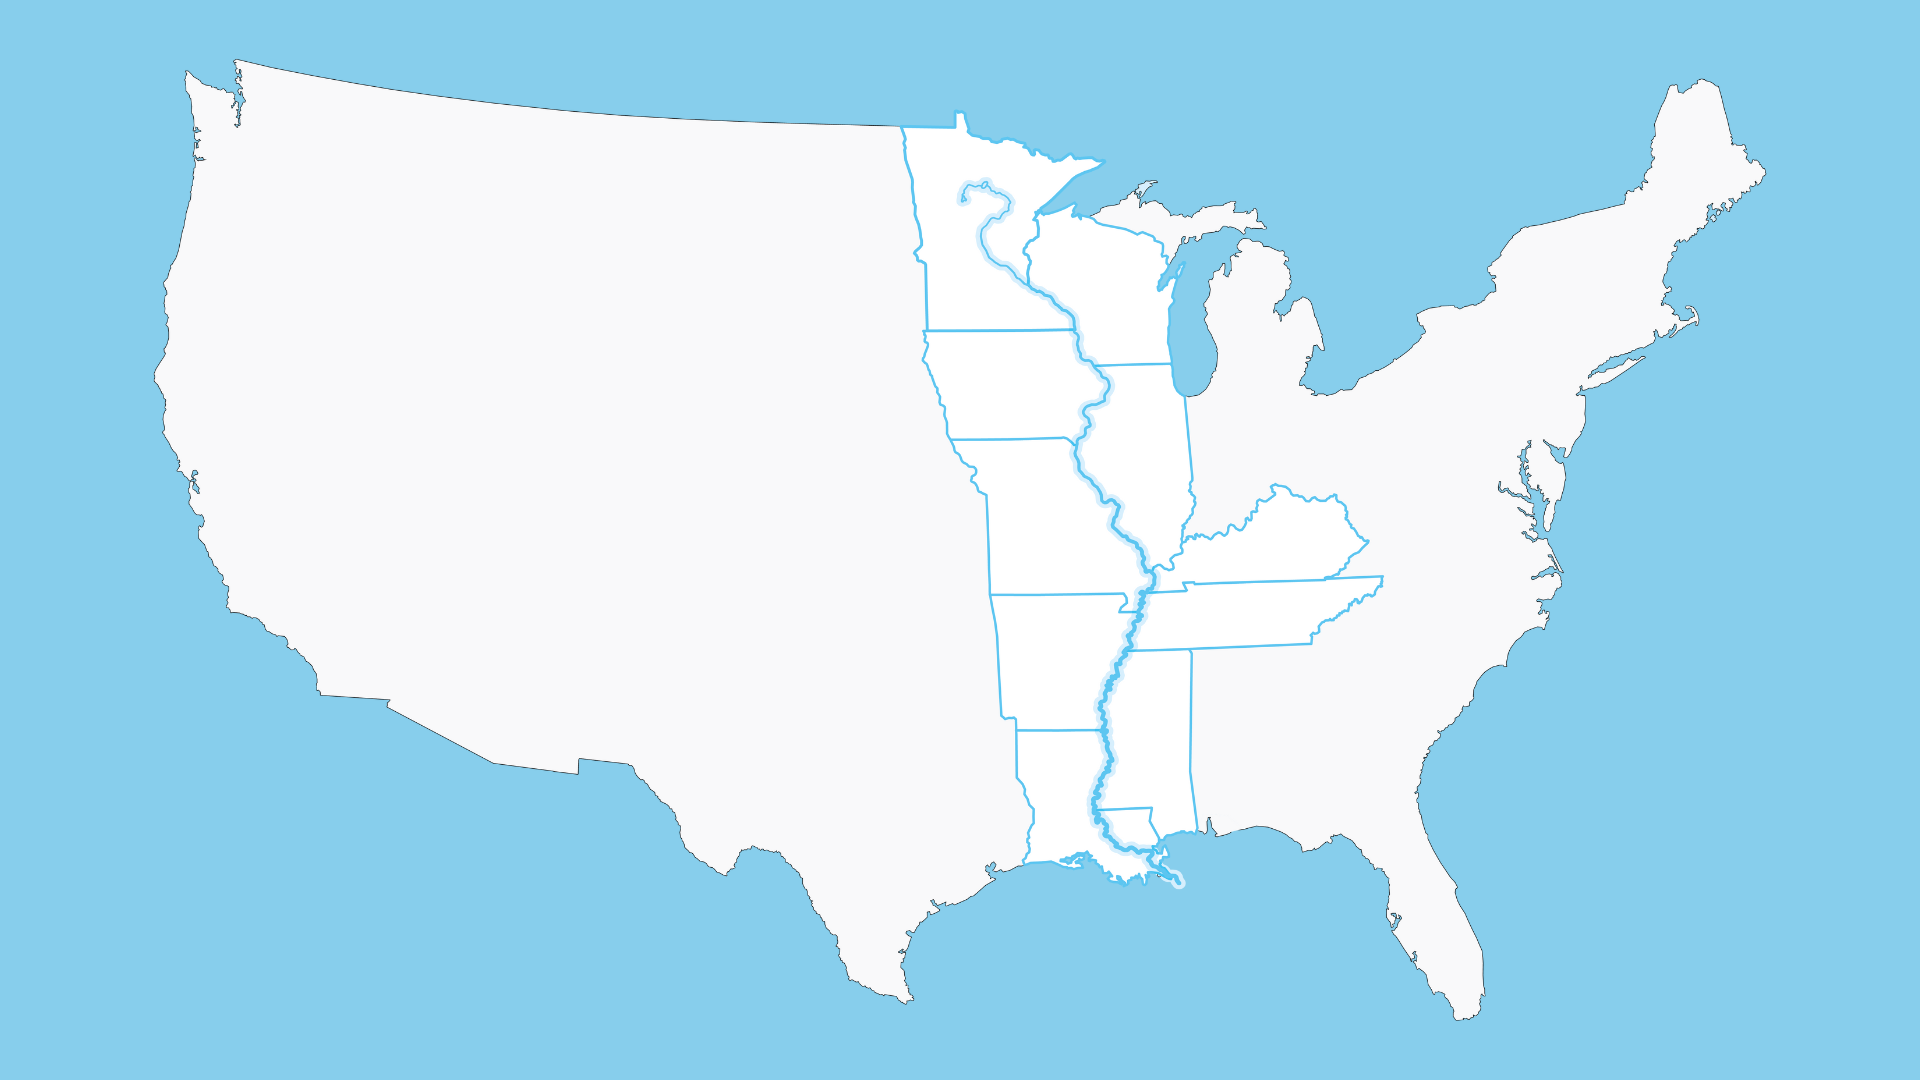 Outline of continental US with Mississippi River flowing through 10 states.